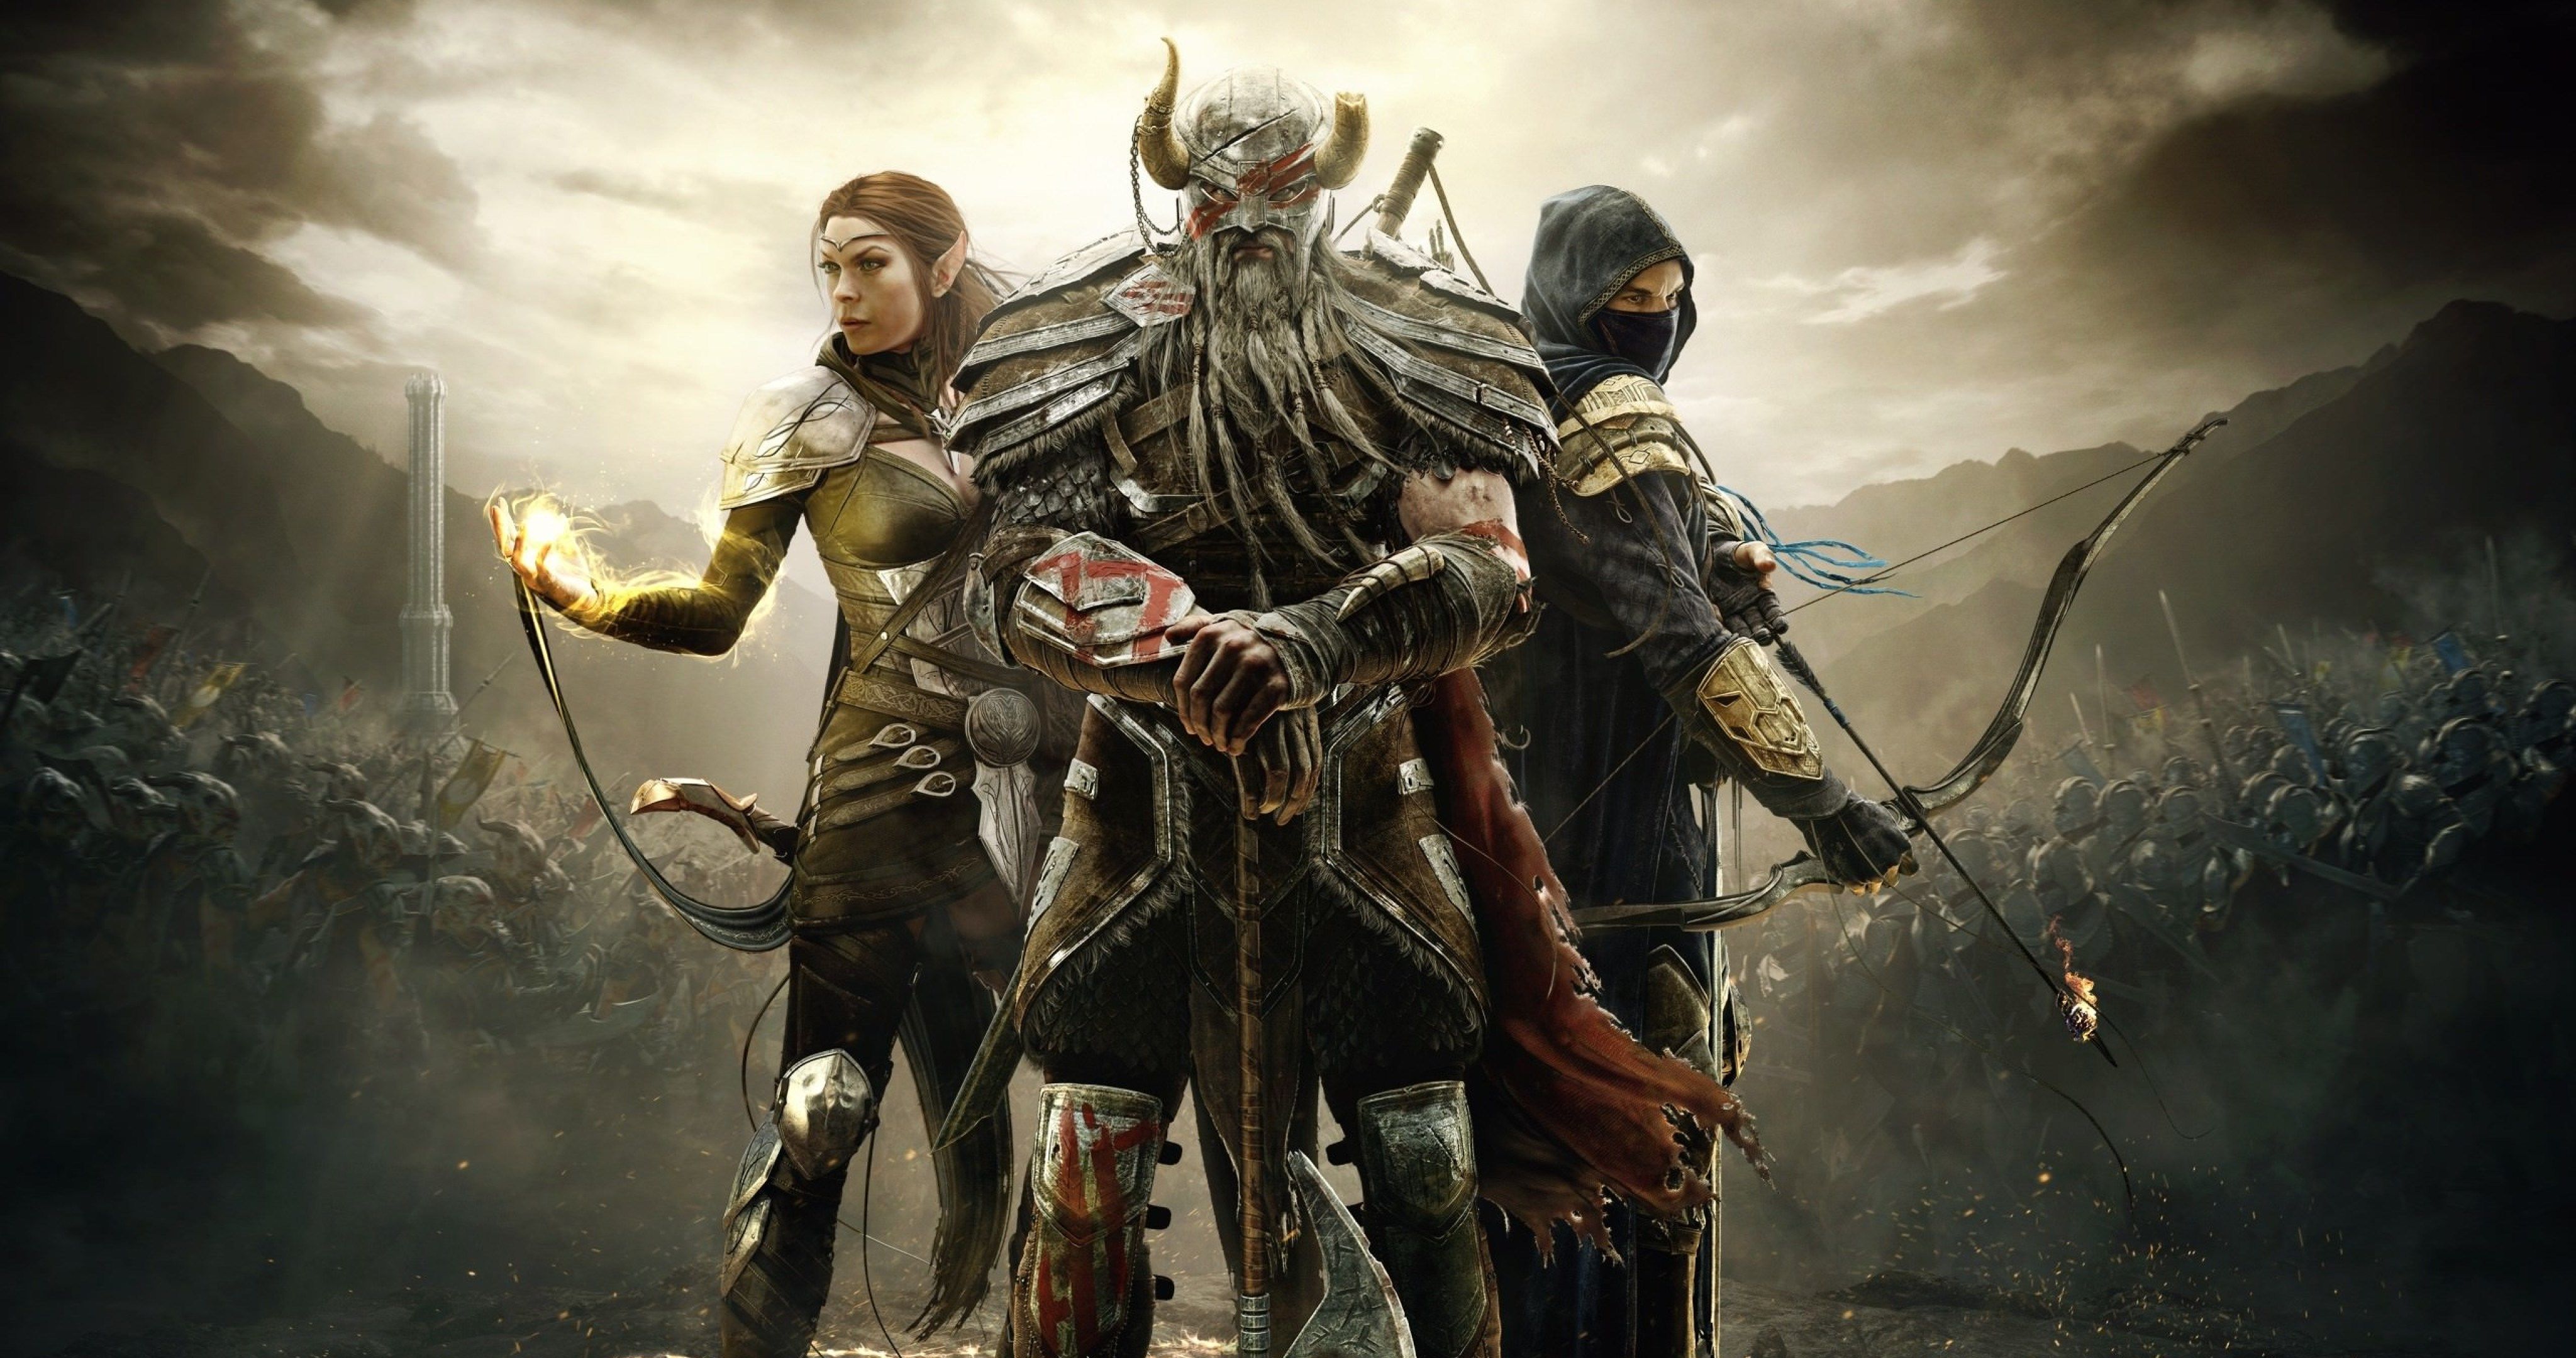 teso wallpaper,action adventure game,pc game,cg artwork,fictional character,movie